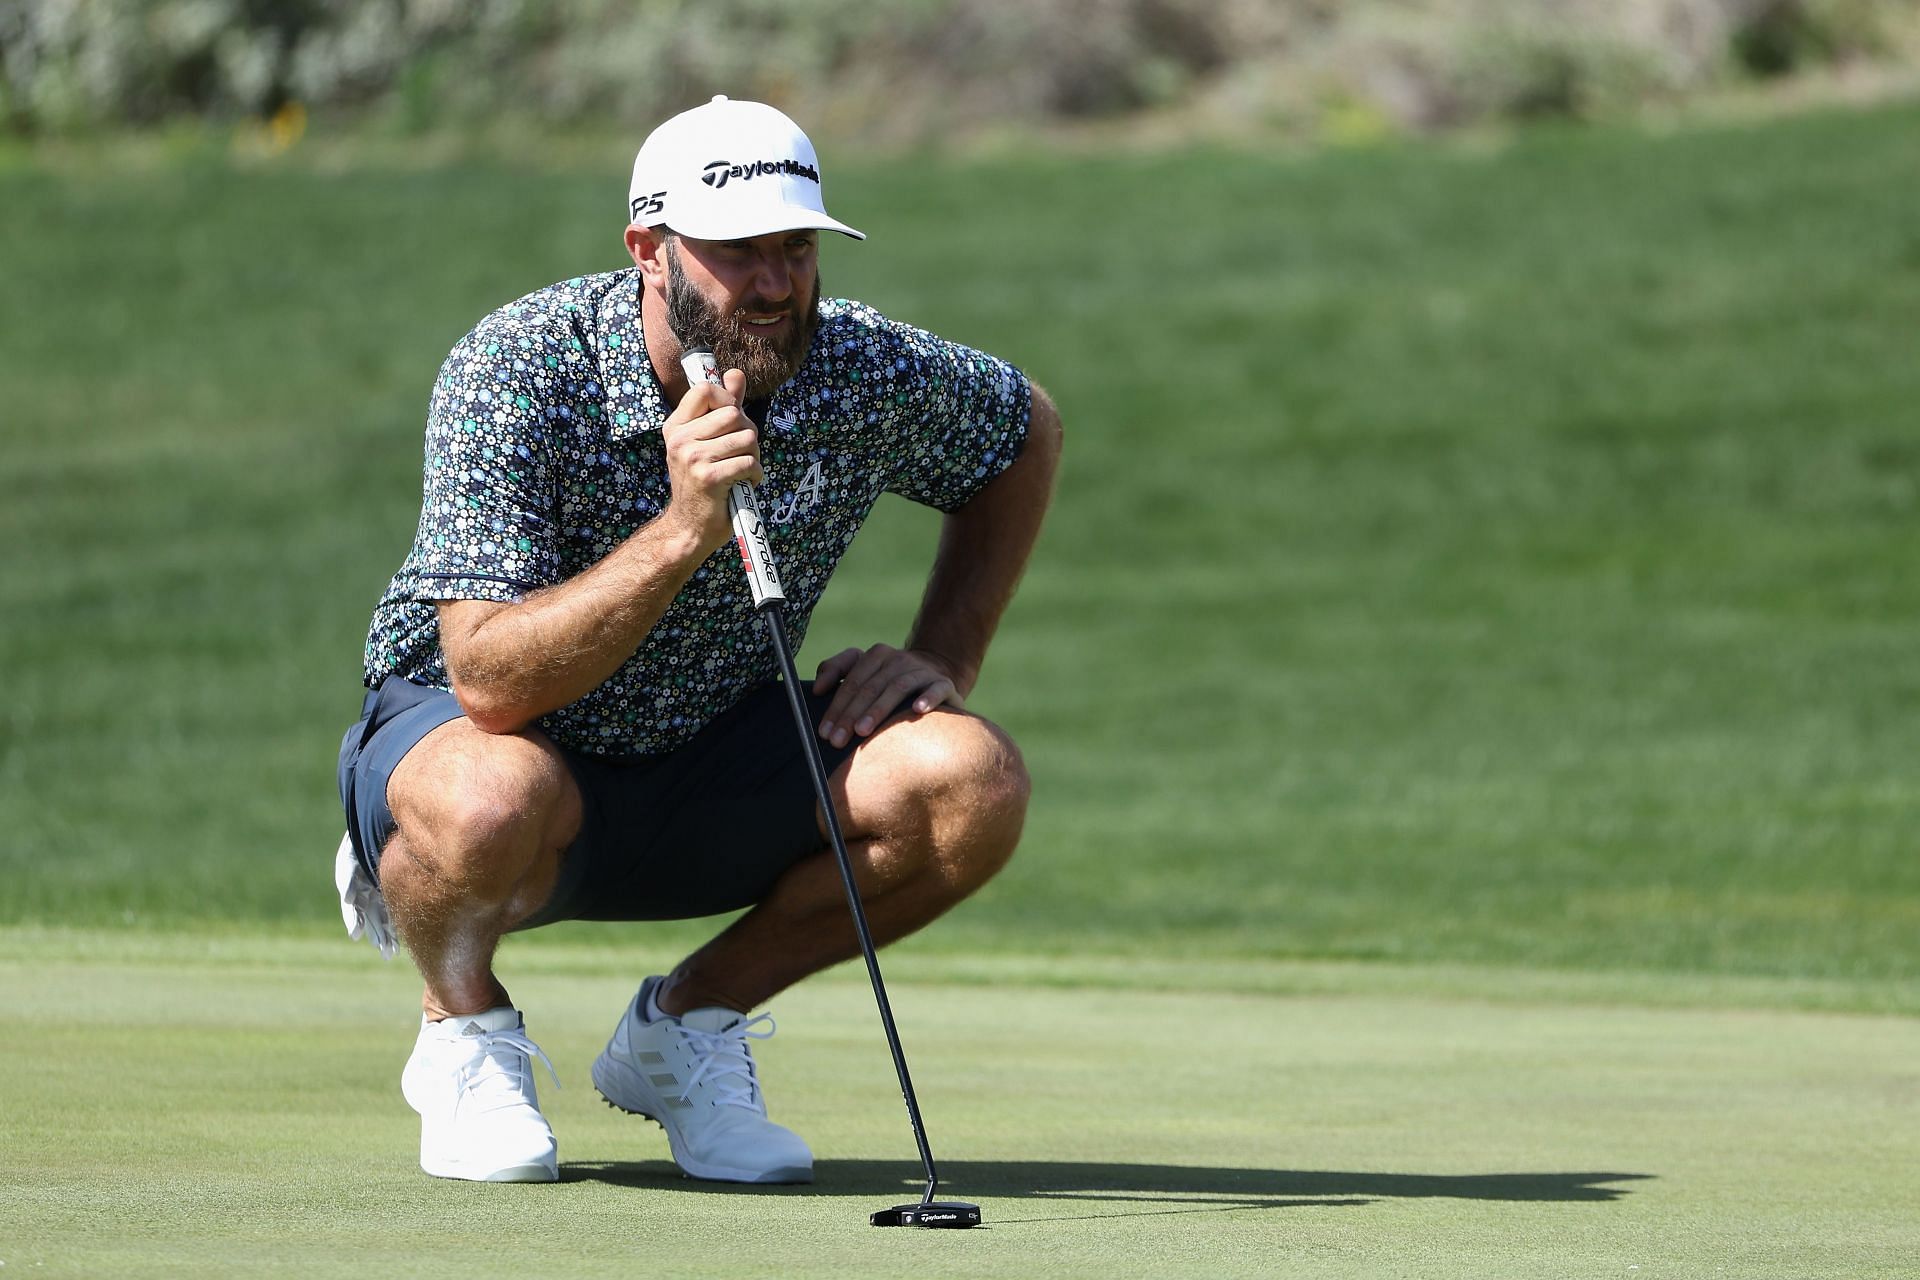 Does Dustin Johnson have a new sponsorship deal? LIV golfer spotted wearing FootJoy shoes after split with